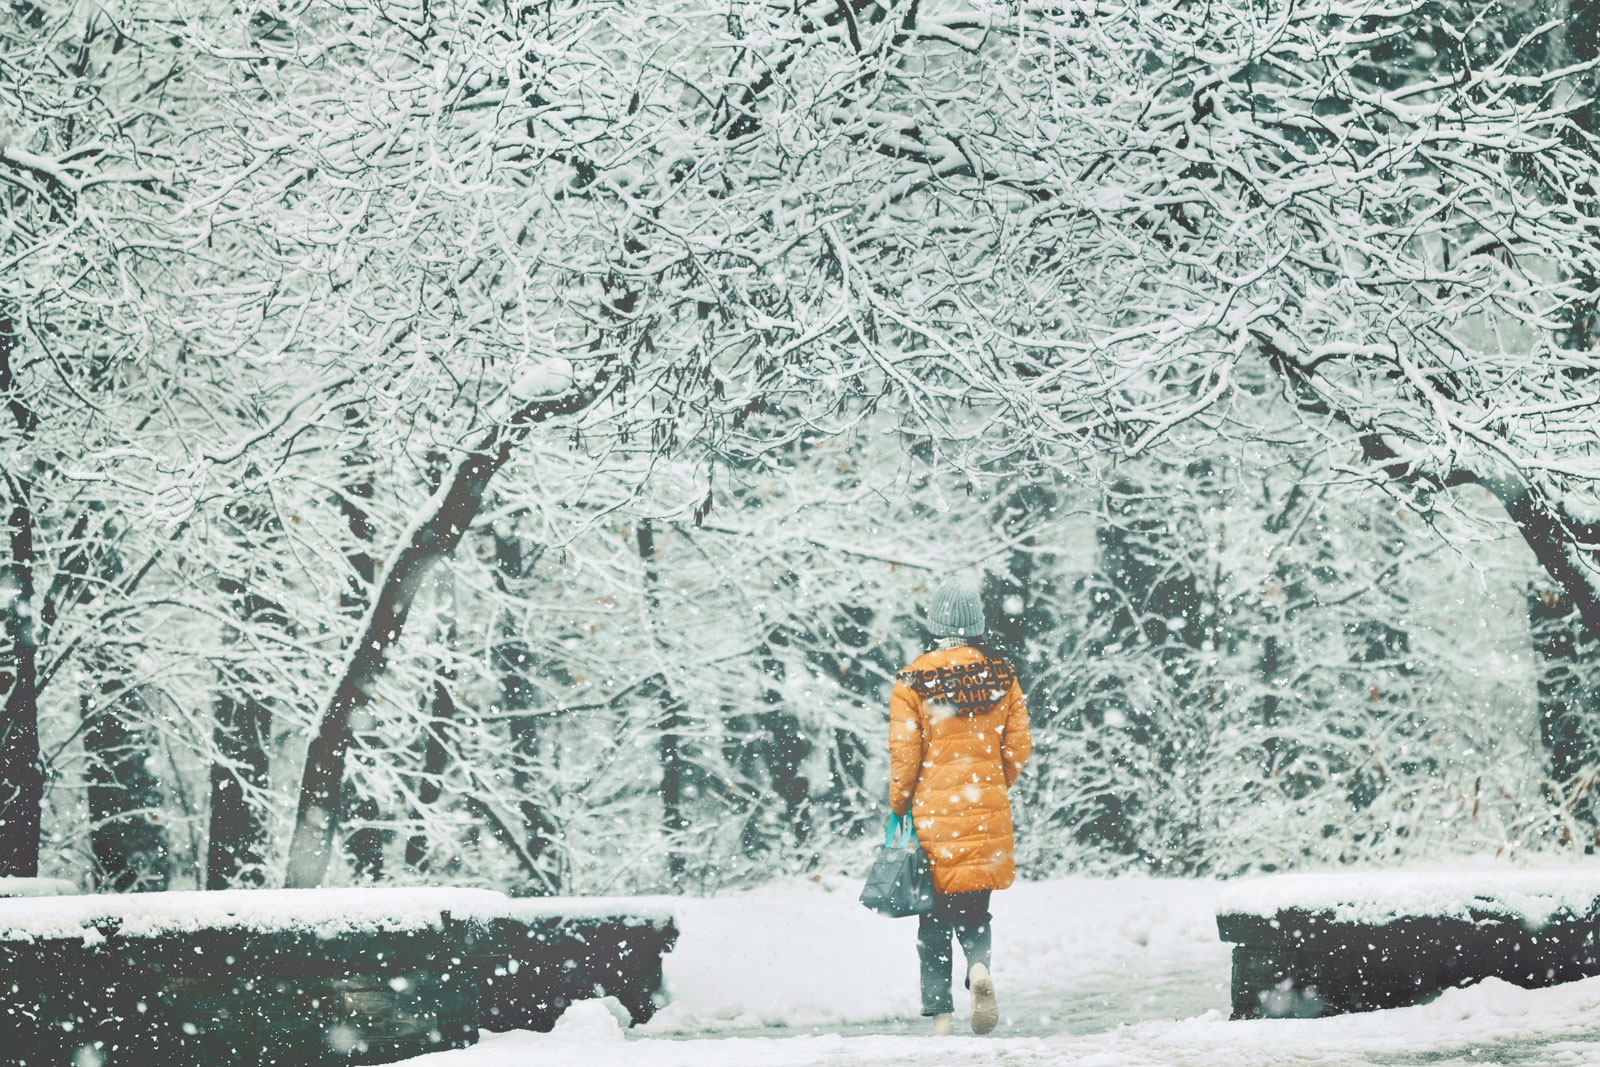 A student heads from Collegetown toward the Engineering Quad in a snowstorm